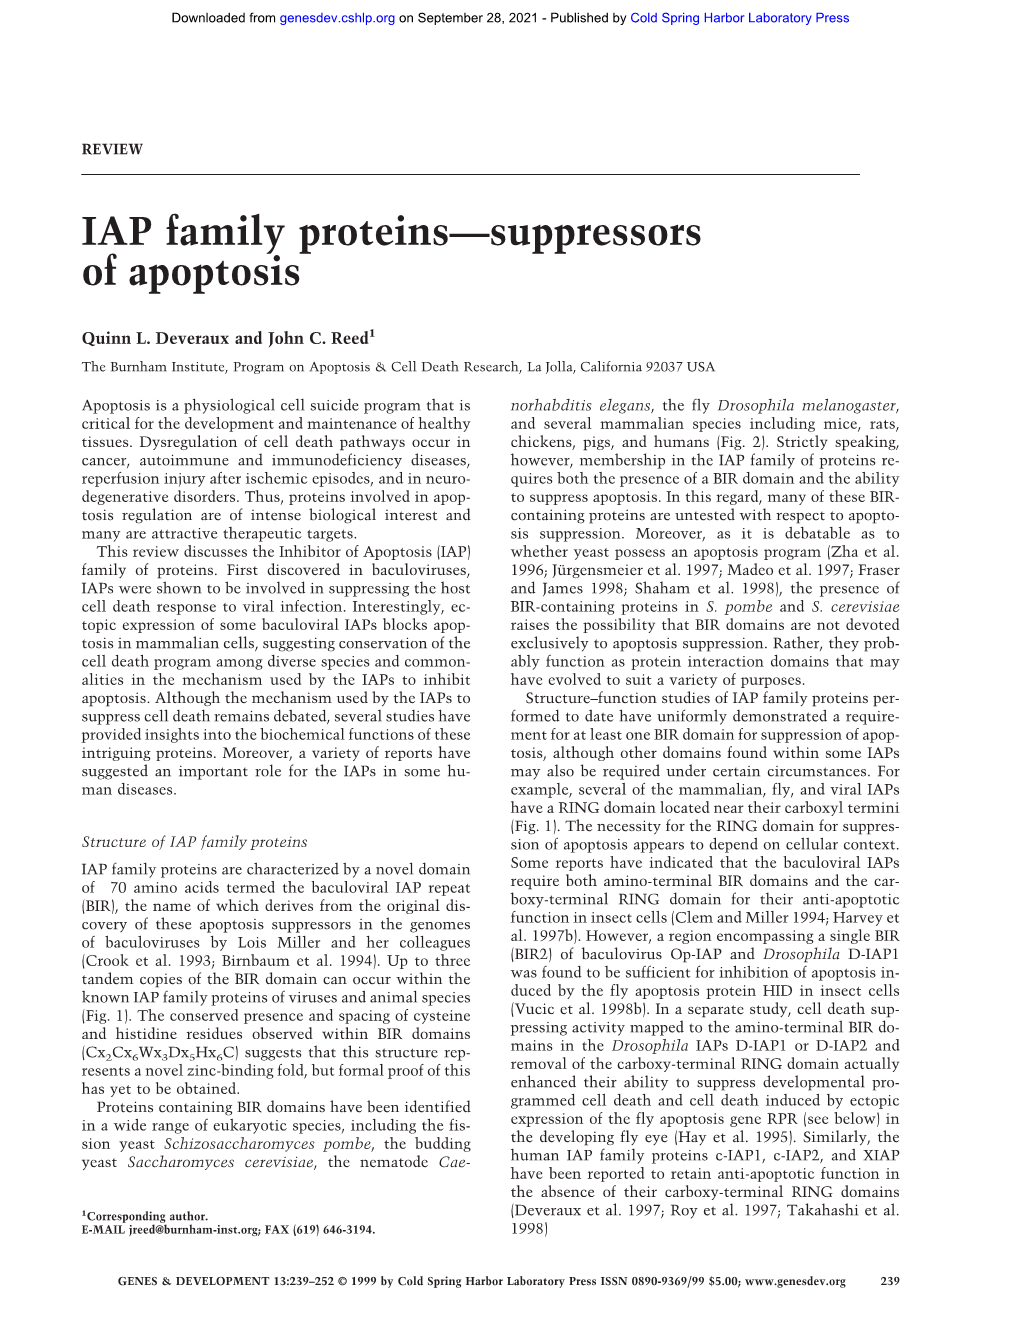 IAP Family Proteins—Suppressors of Apoptosis